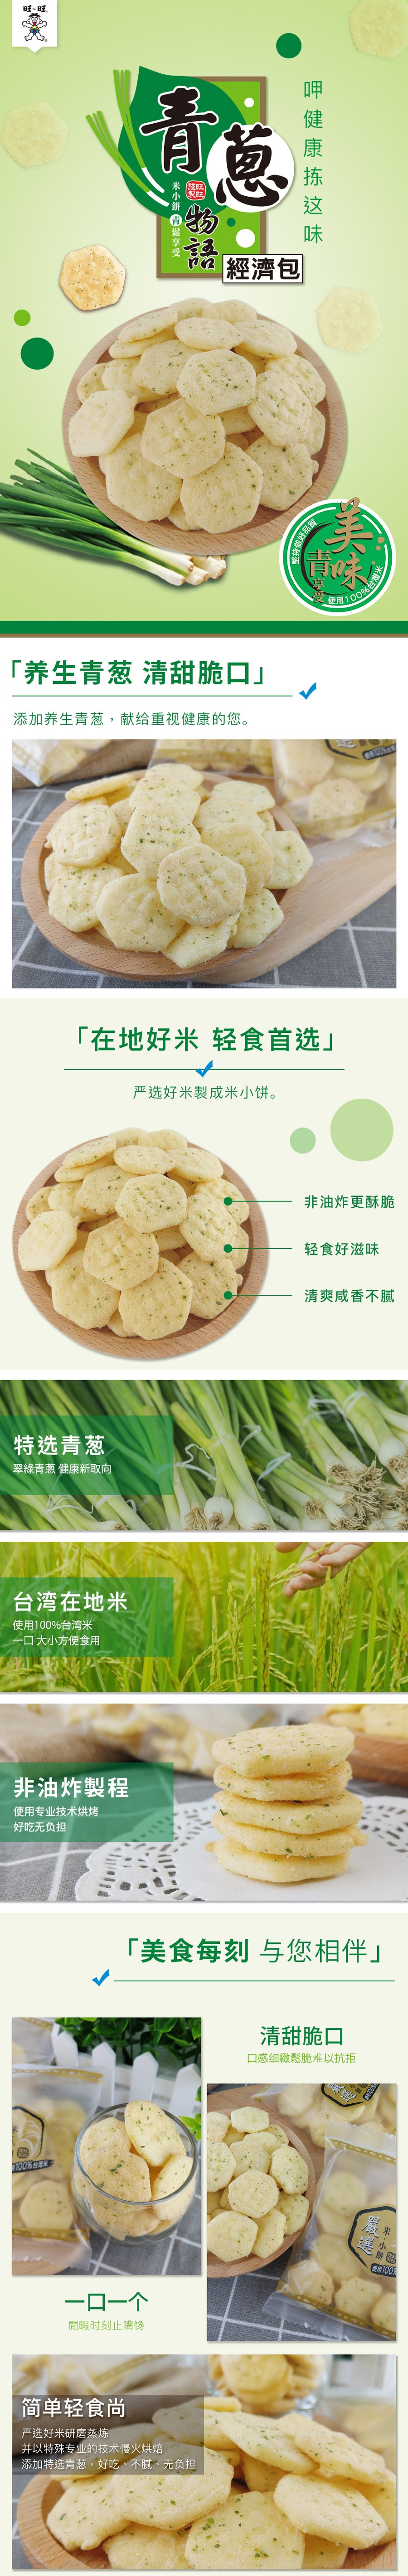 Taiwan Rice Crackers Senbei With Spring Onion Flavor - Share Pack【Vegan】 1 Pack 240g